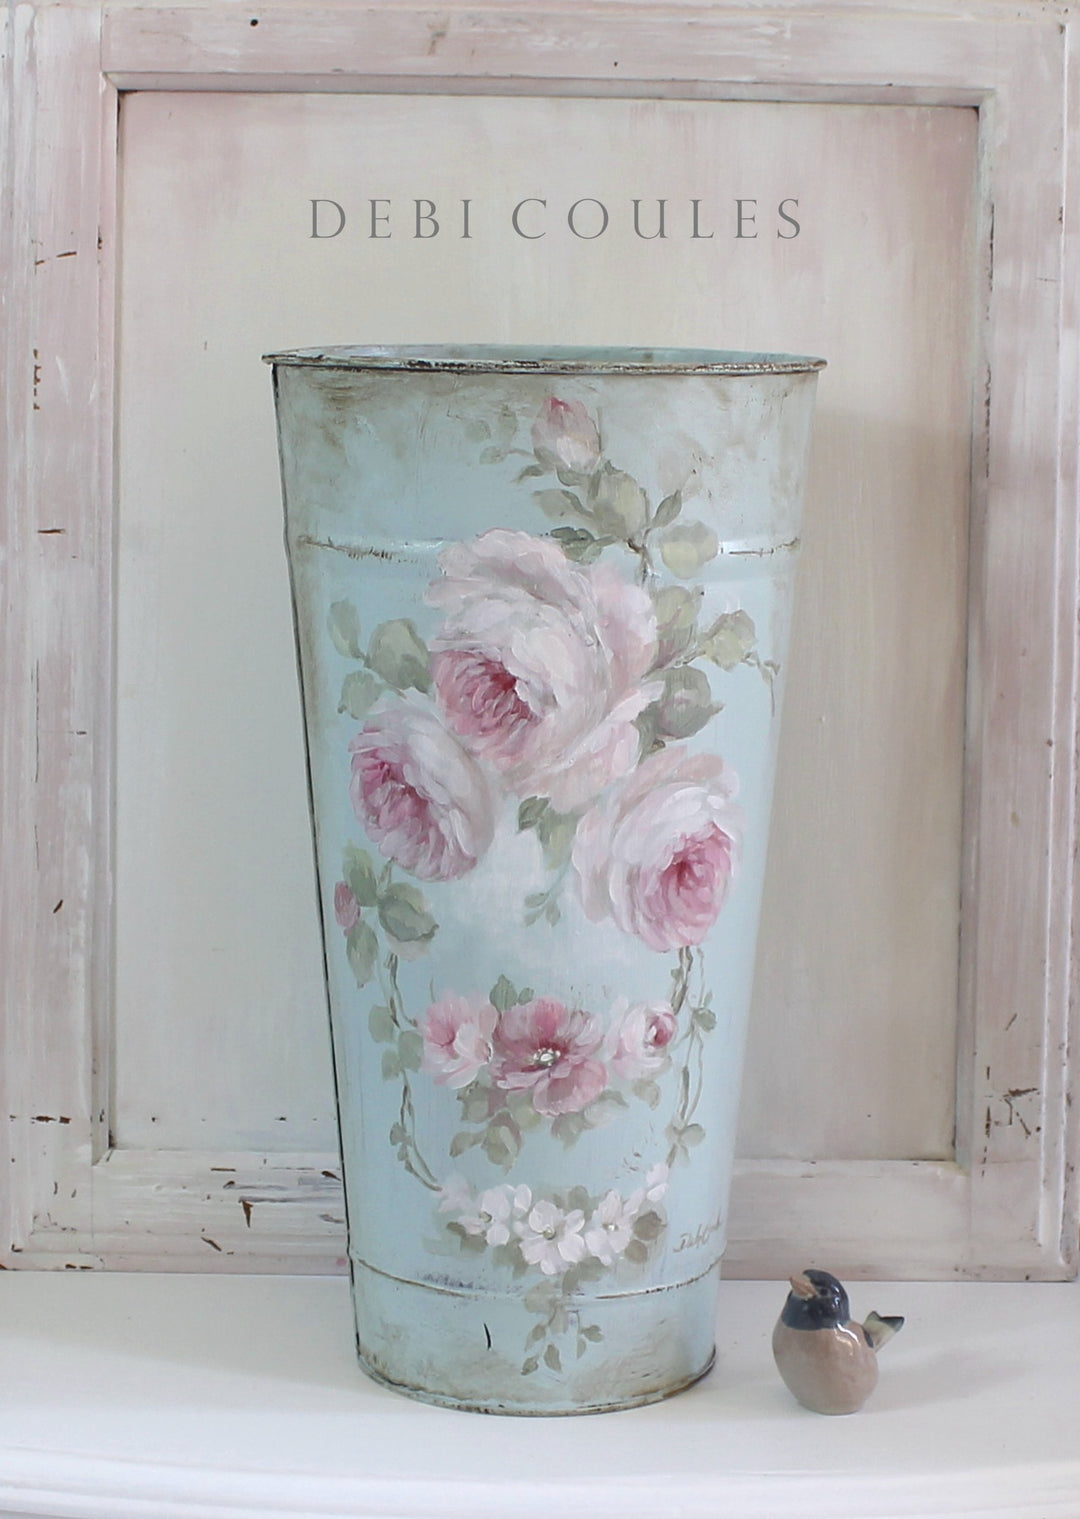 Shabby Chic Vintage Romantic Cottage Style French Floral Bucket Roses by Debi Coules